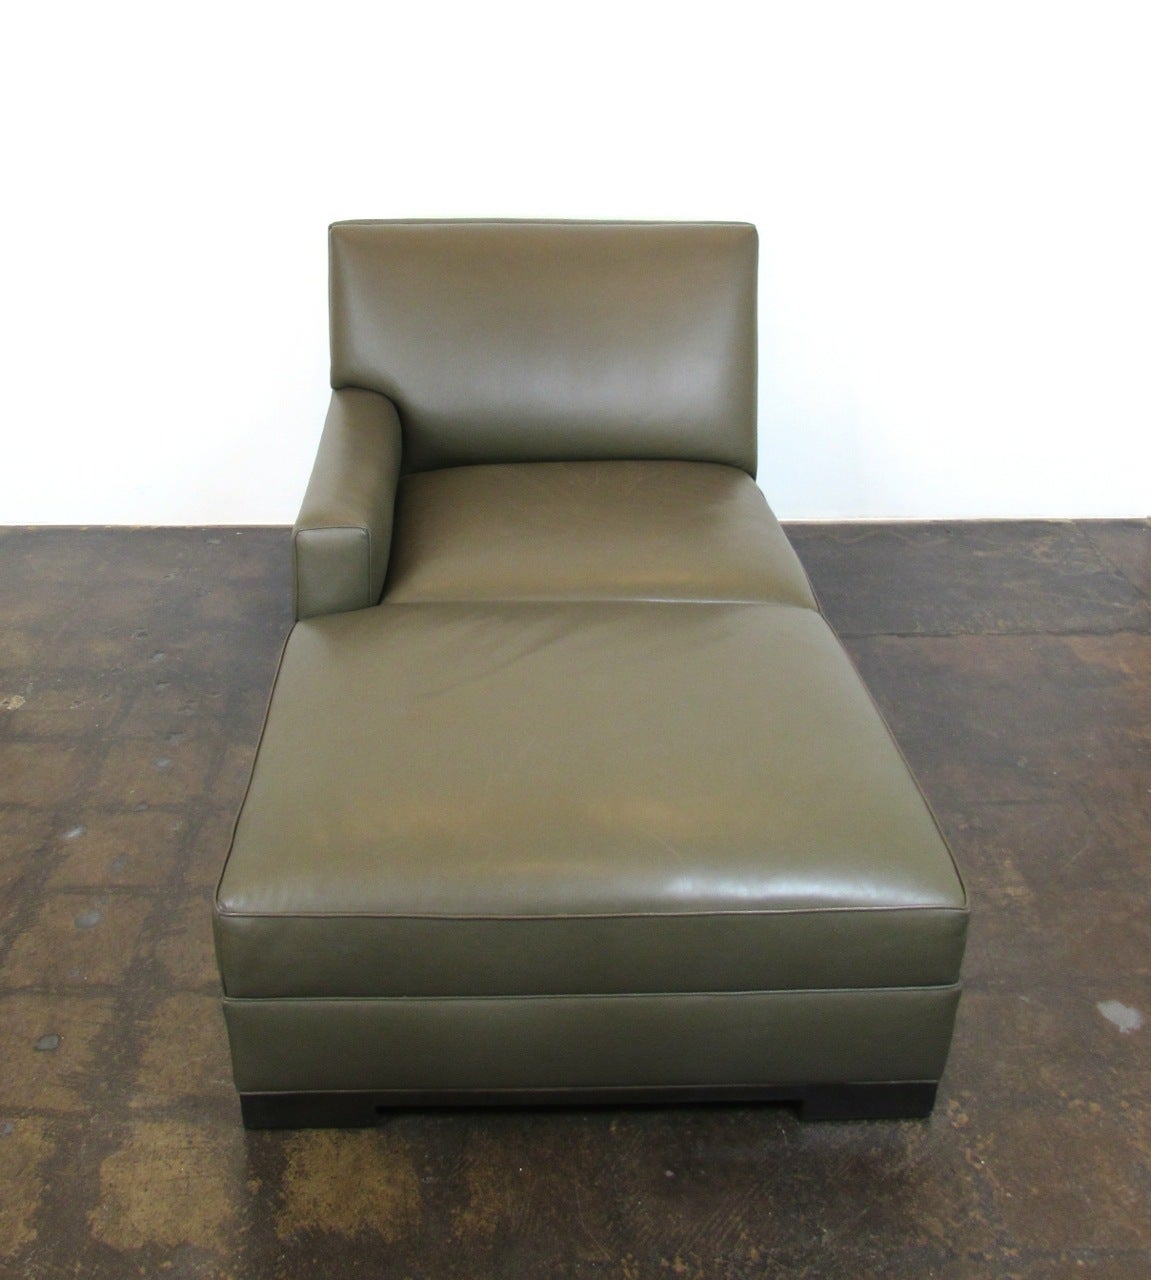 Sutherland Hugo Leather Chaise Lounge In Good Condition For Sale In Dallas, TX